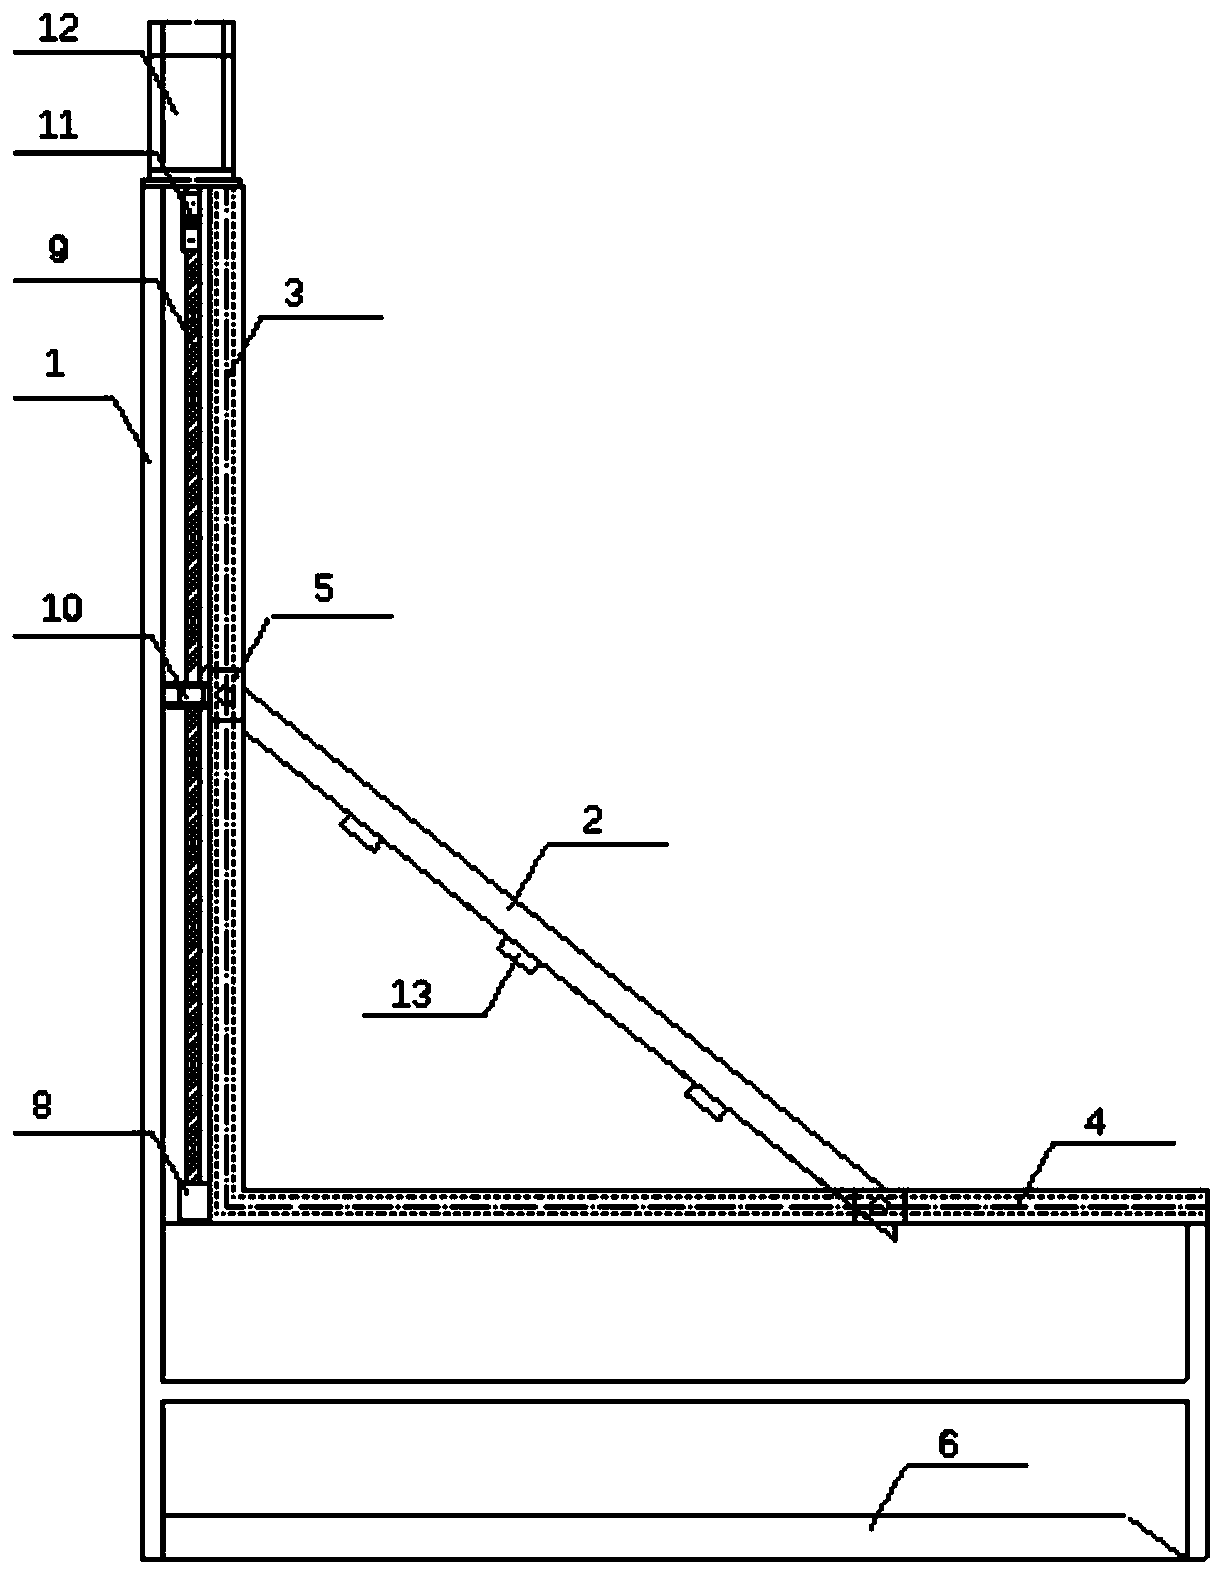 A device and method for automatically measuring the external friction angle of solids